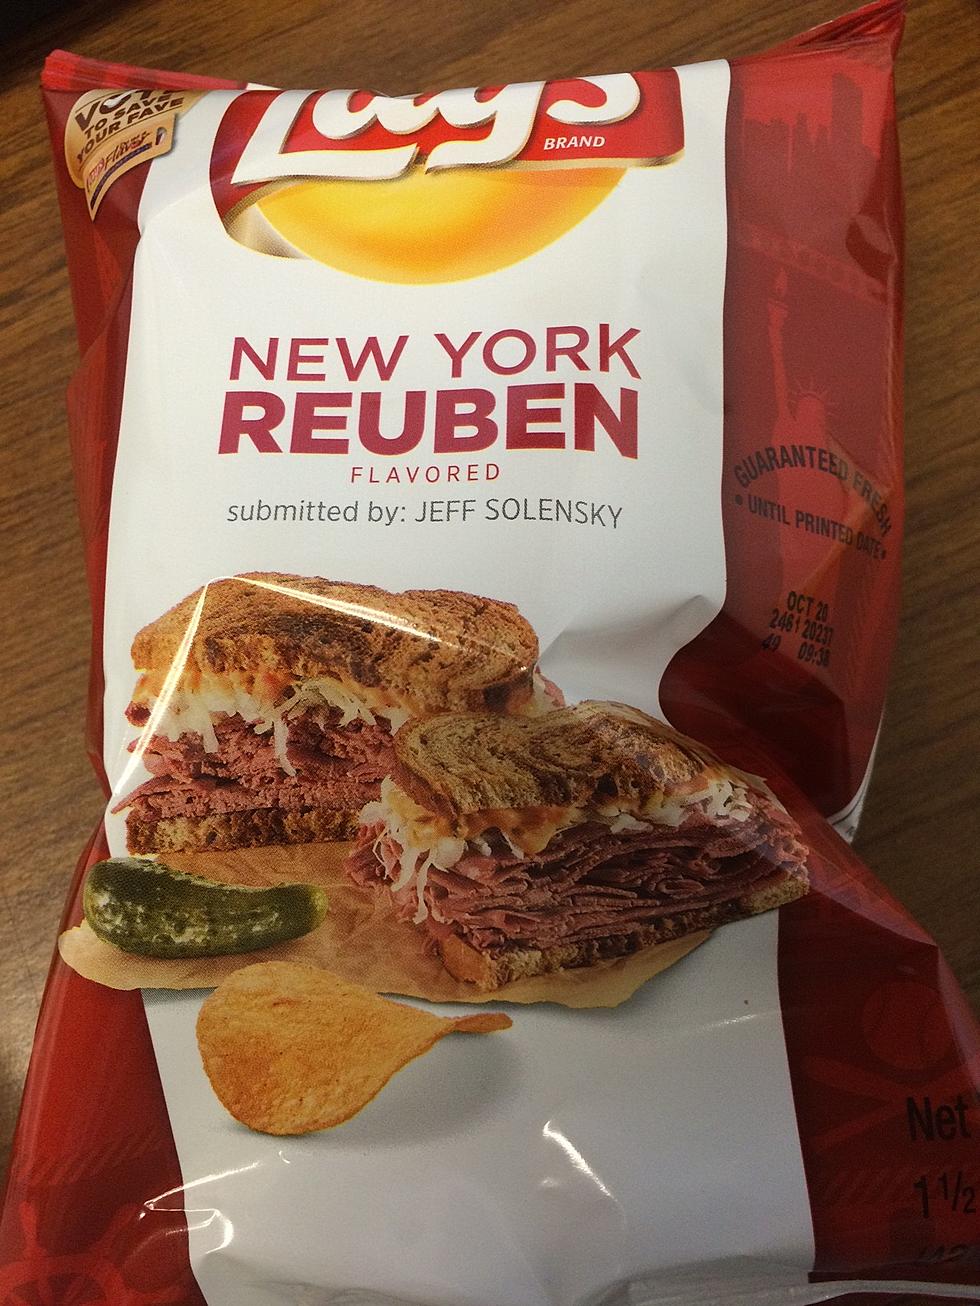 Lays Is Trying Too Hard With Their New ‘Tastes Of America’ Line Of Potato Chips